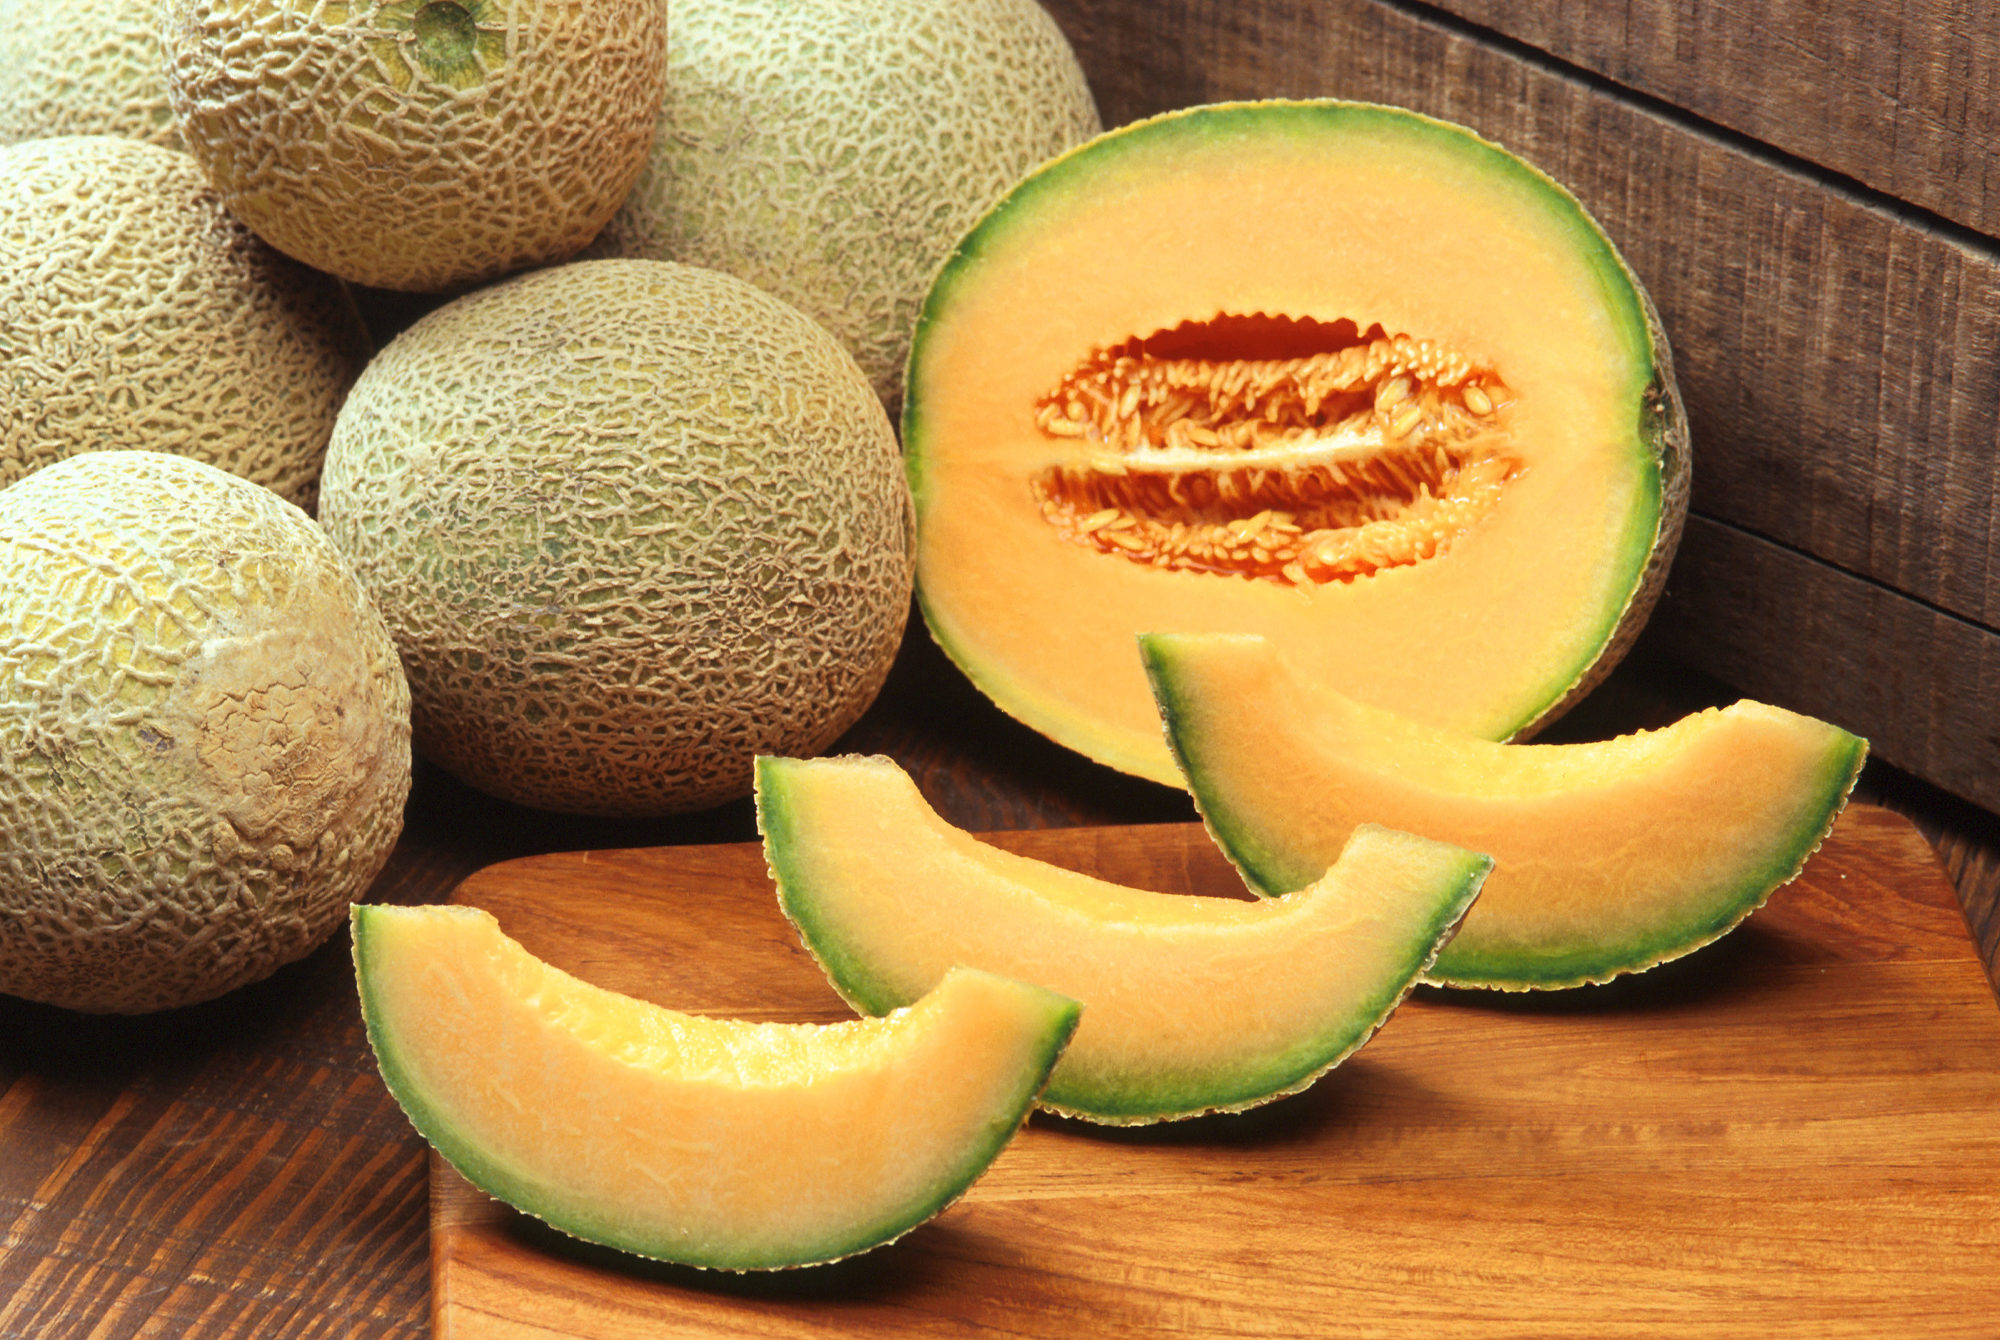 Produce of the Month: Cantaloupe